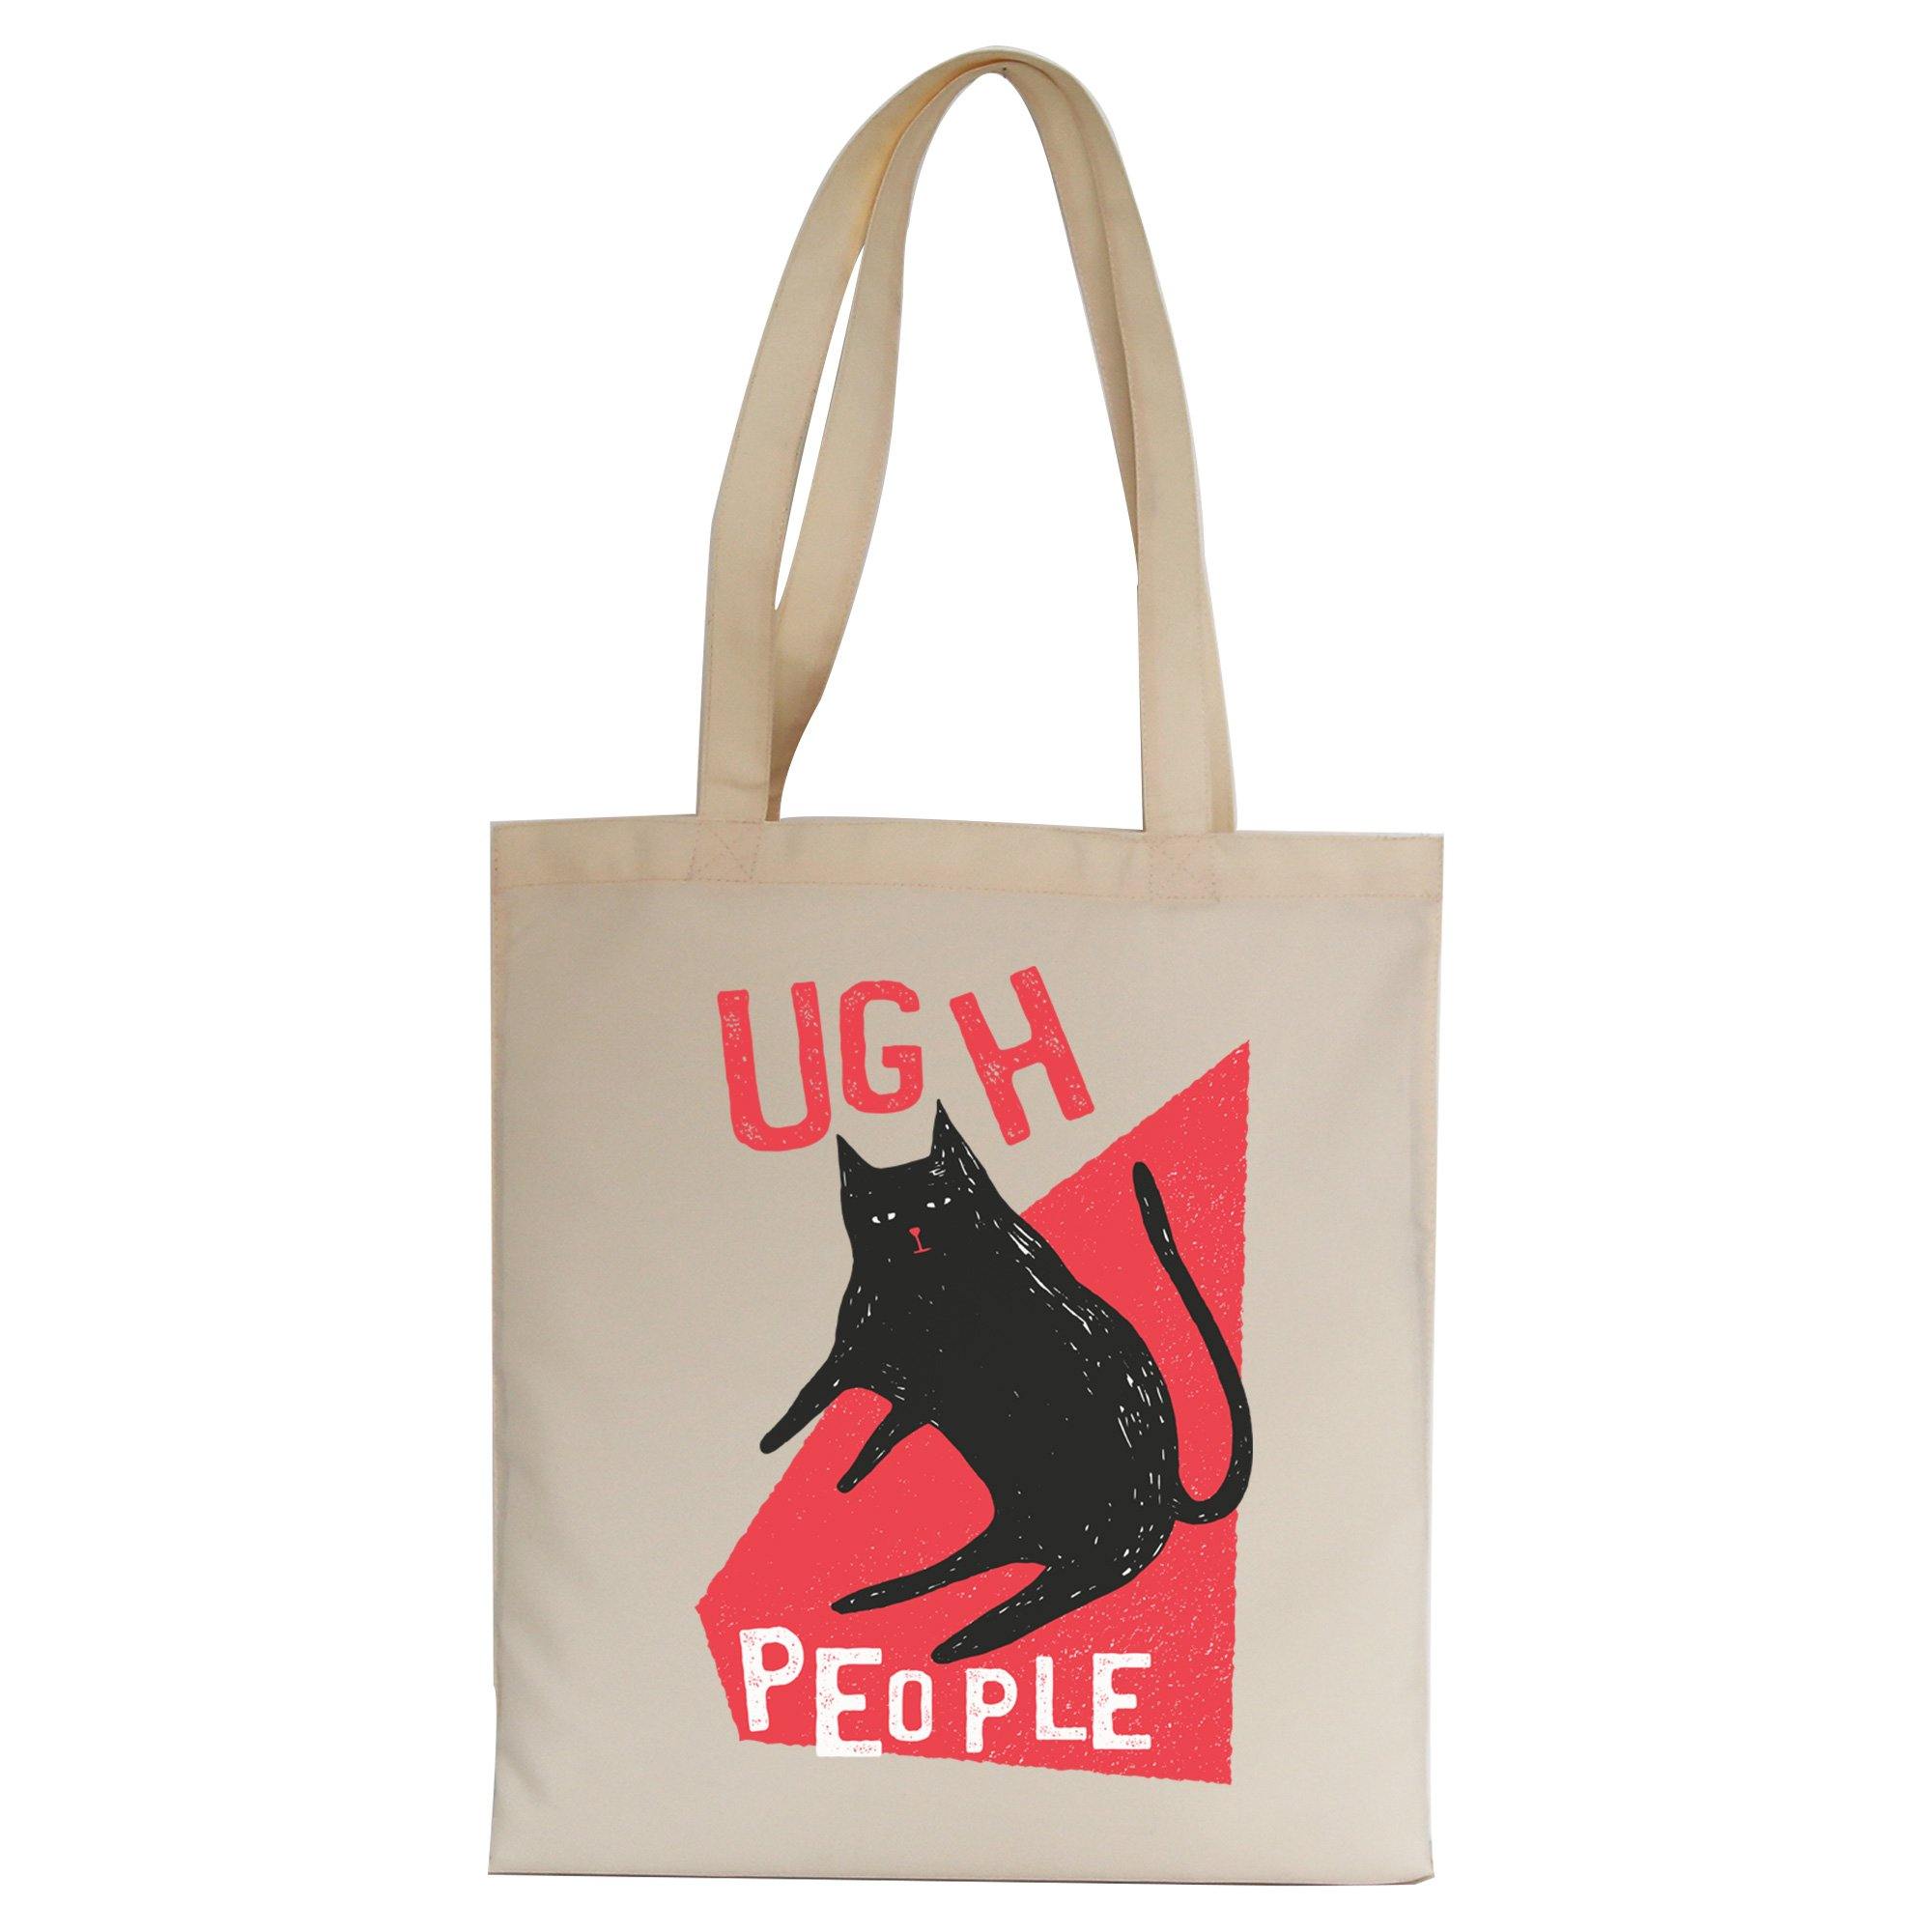 Ugh people funny rude offensive tote bag canvas shopping | Graphic Gear